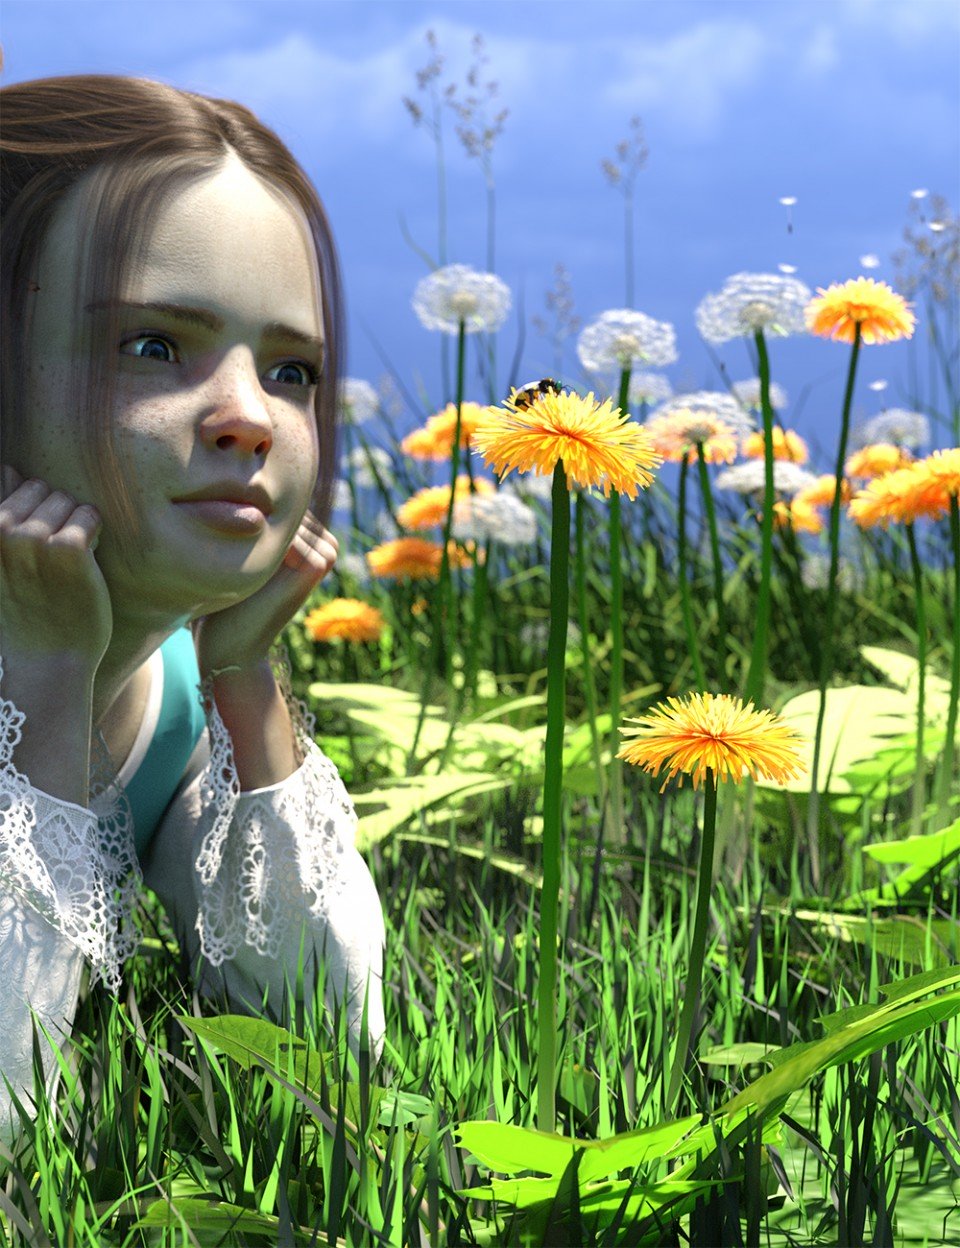 Dandelions – Grassland and Lawn Plants and Seeds_DAZ3D下载站